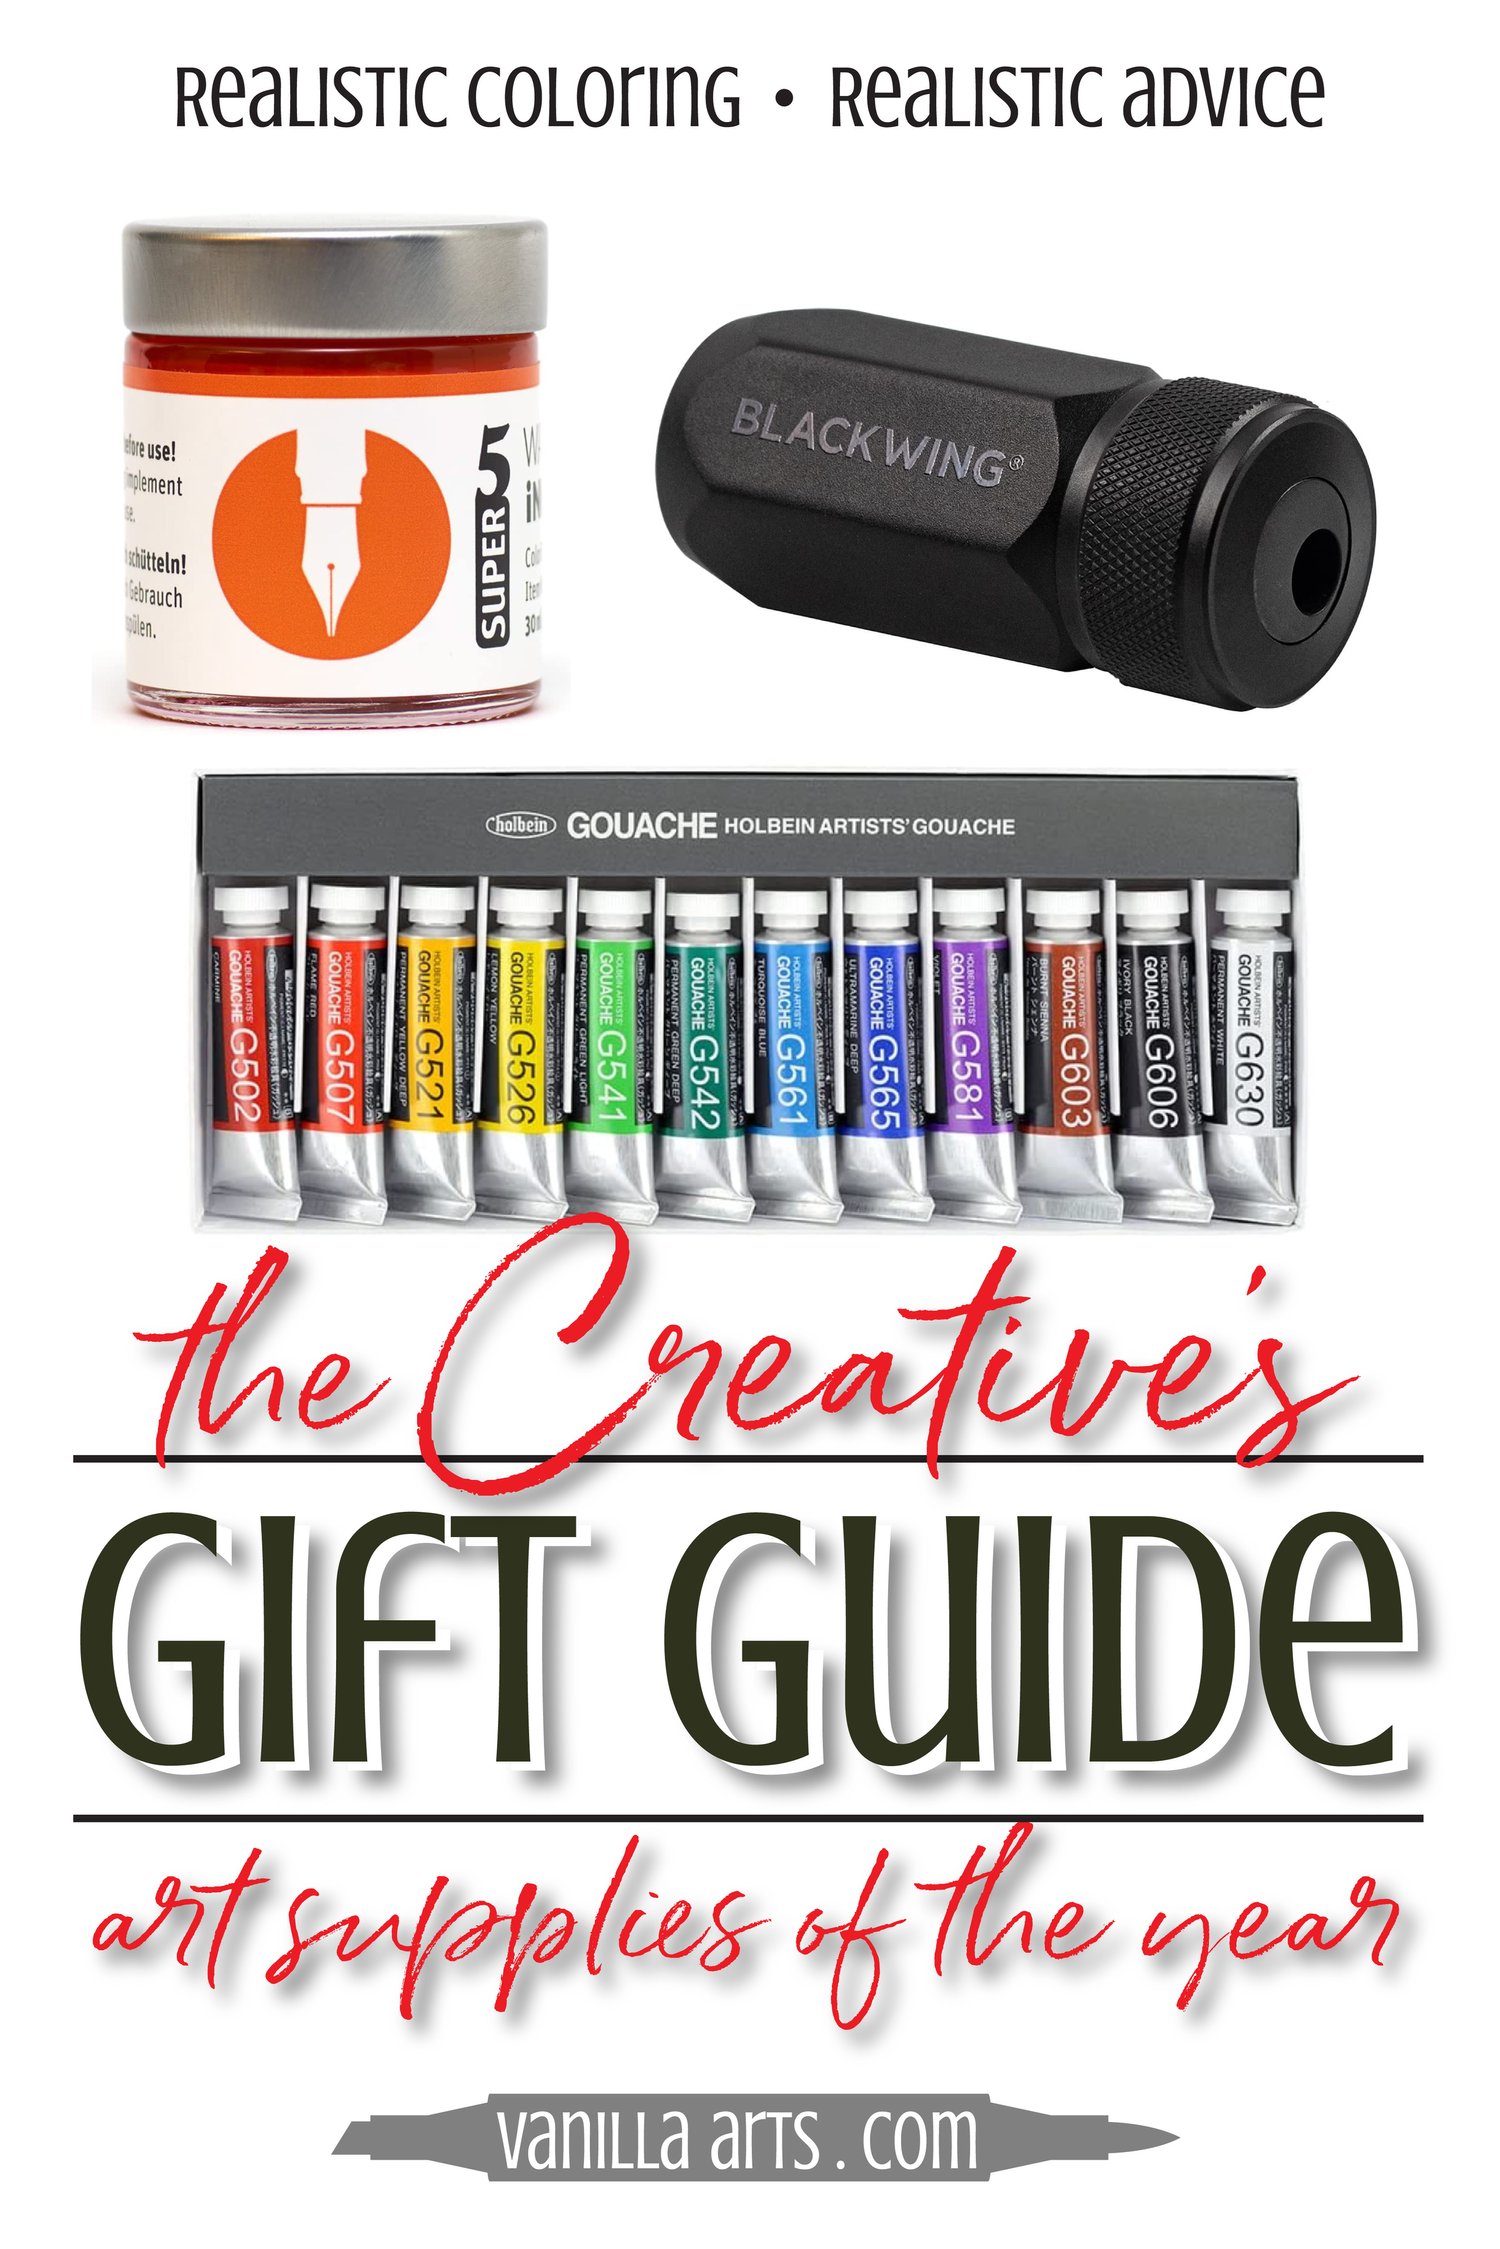 The Creative's Gift Guide: Best Art Supplies of the Year — Vanilla